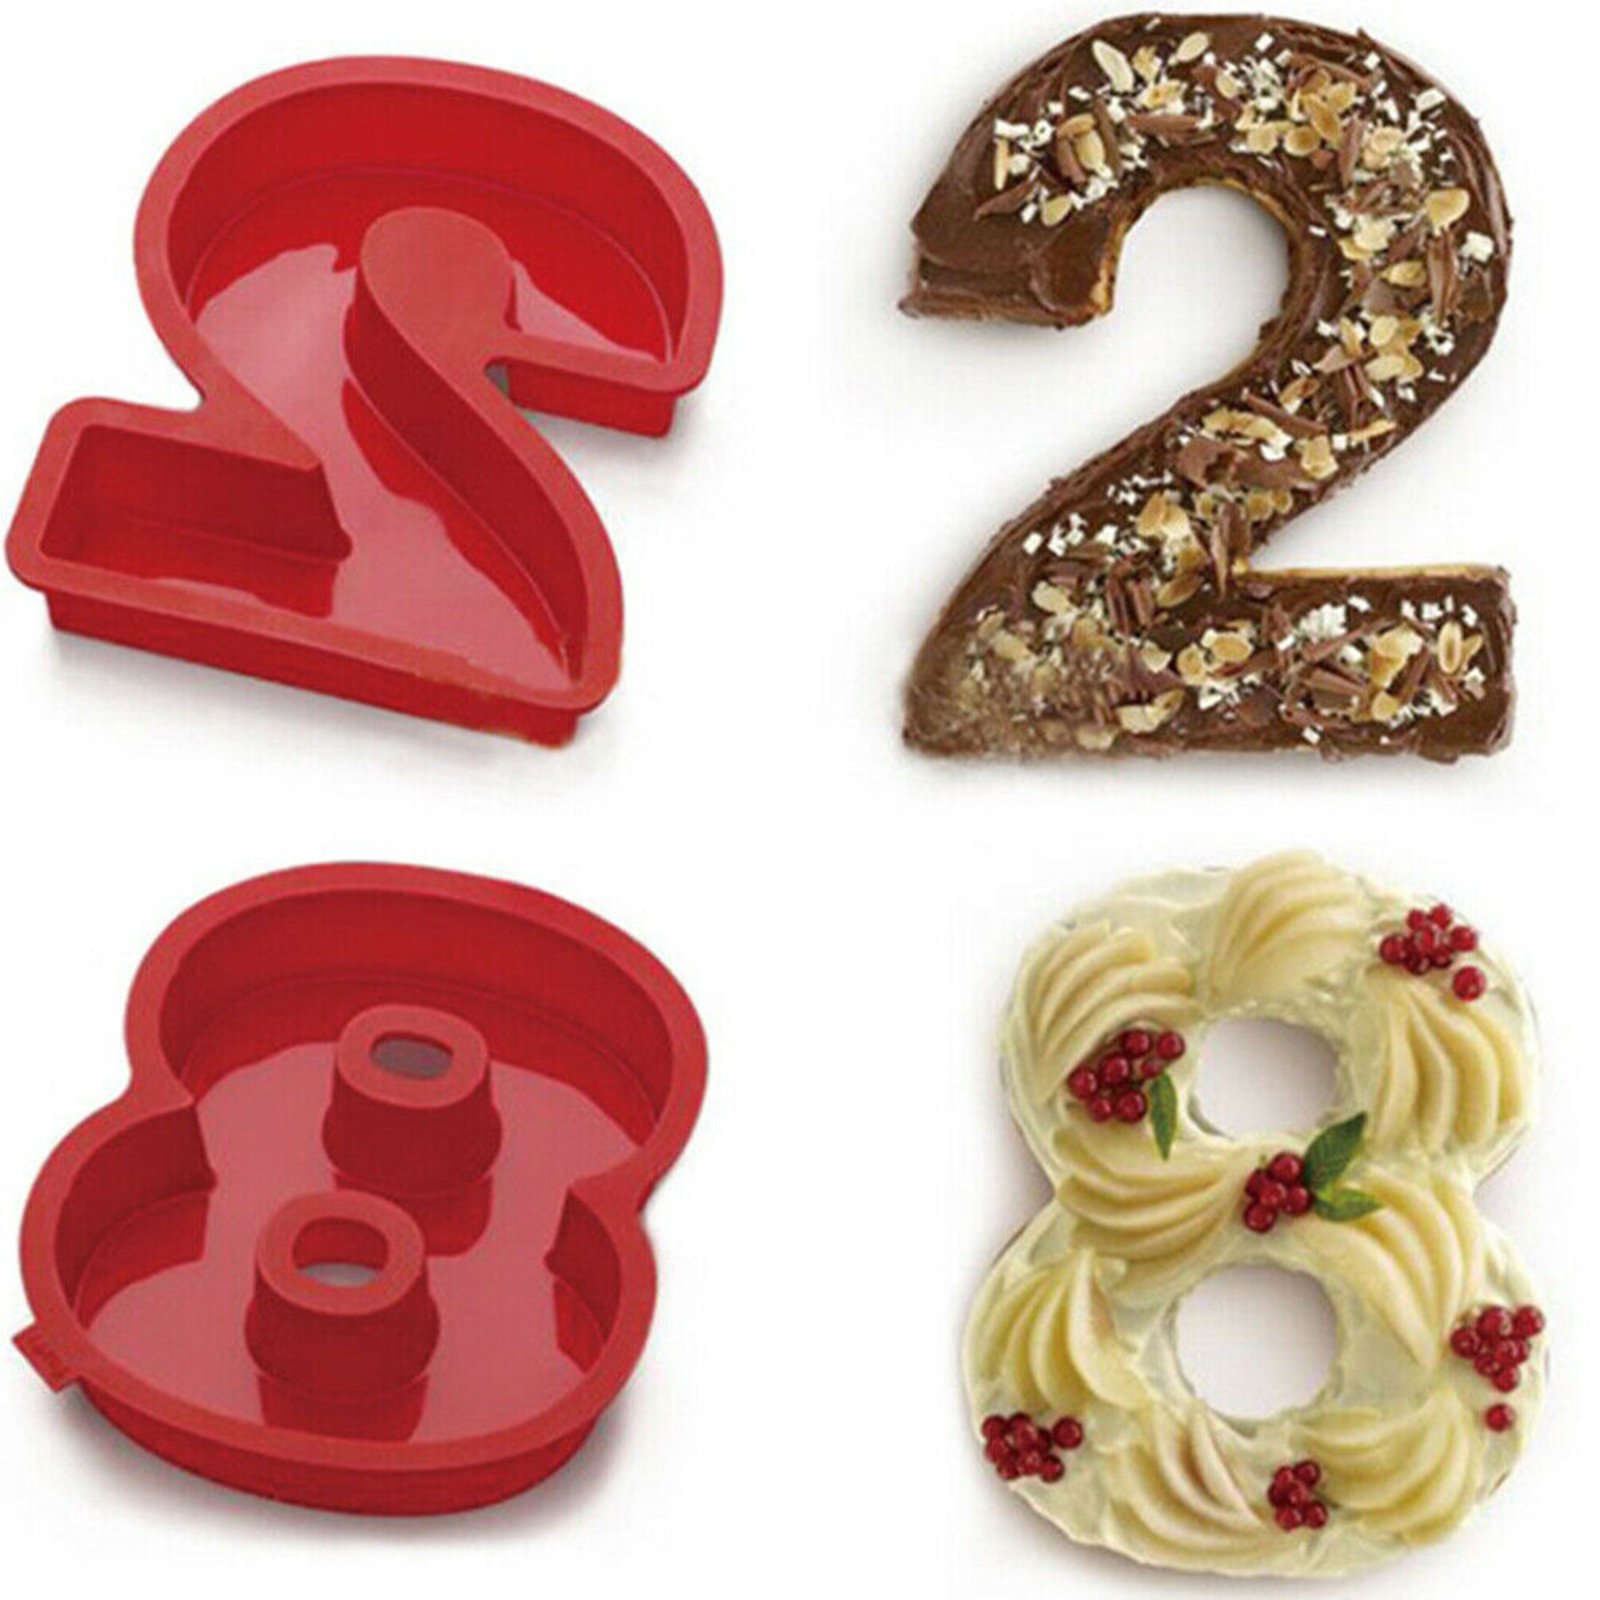 Number Cake Tins Silicone, Number 4 Cake Tin Mould, 10 inch 3D Large  Silicone Number Cake Moulds, Baking Pans for Birthday and Anniversary, BPA  Free, Non-Stick : Amazon.co.uk: Home & Kitchen